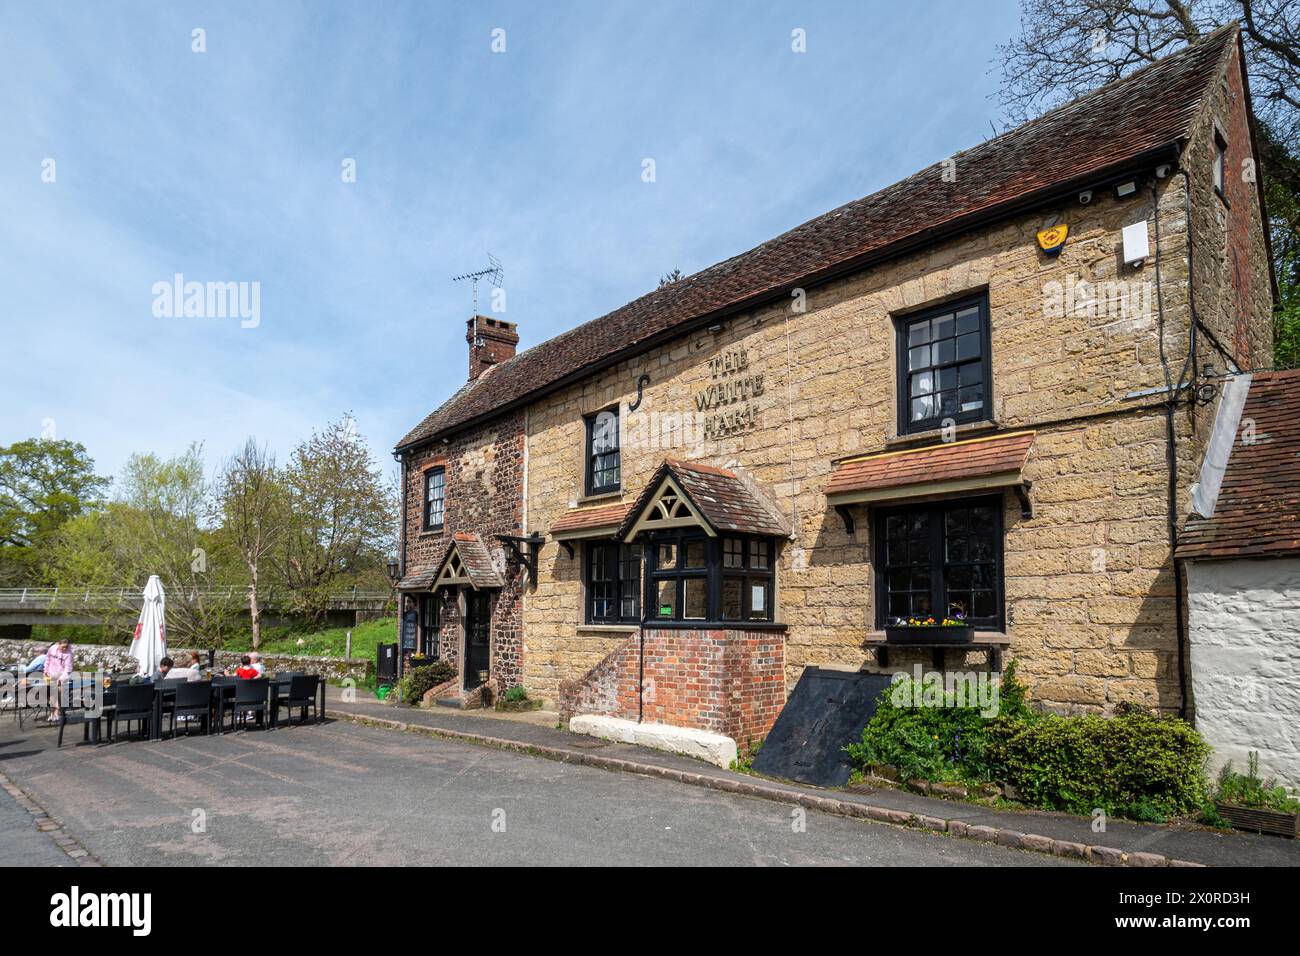 The White Hart pub with people sitting outside in Stopham village, West Sussex, England, UK Stock Photo